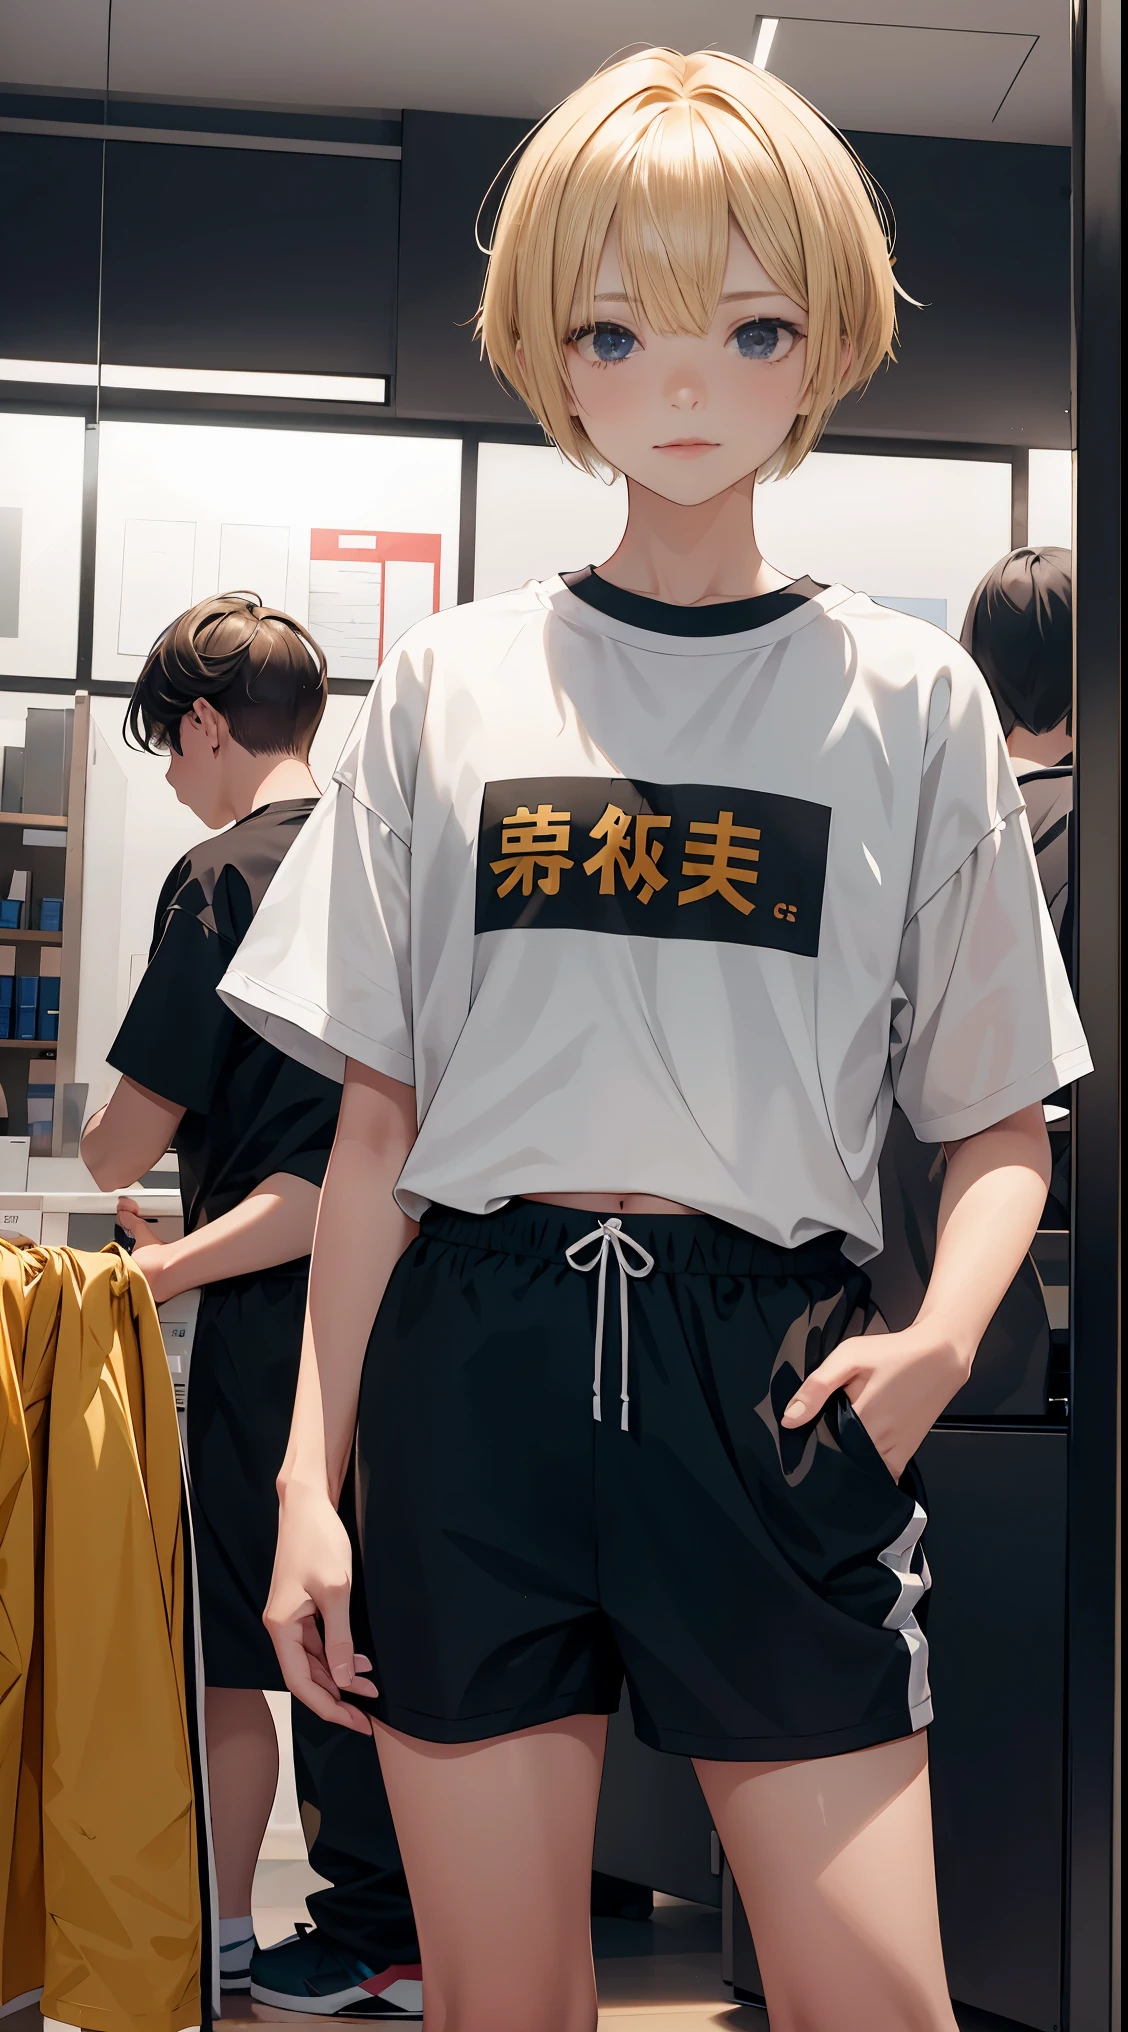 13 year old blonde boy，Sporty，short bob hair，bangs are long,short back hair、 Please wear a shirt and shorts, Kneel in a small store with office supplies, , Other colorful notes were scattered around him